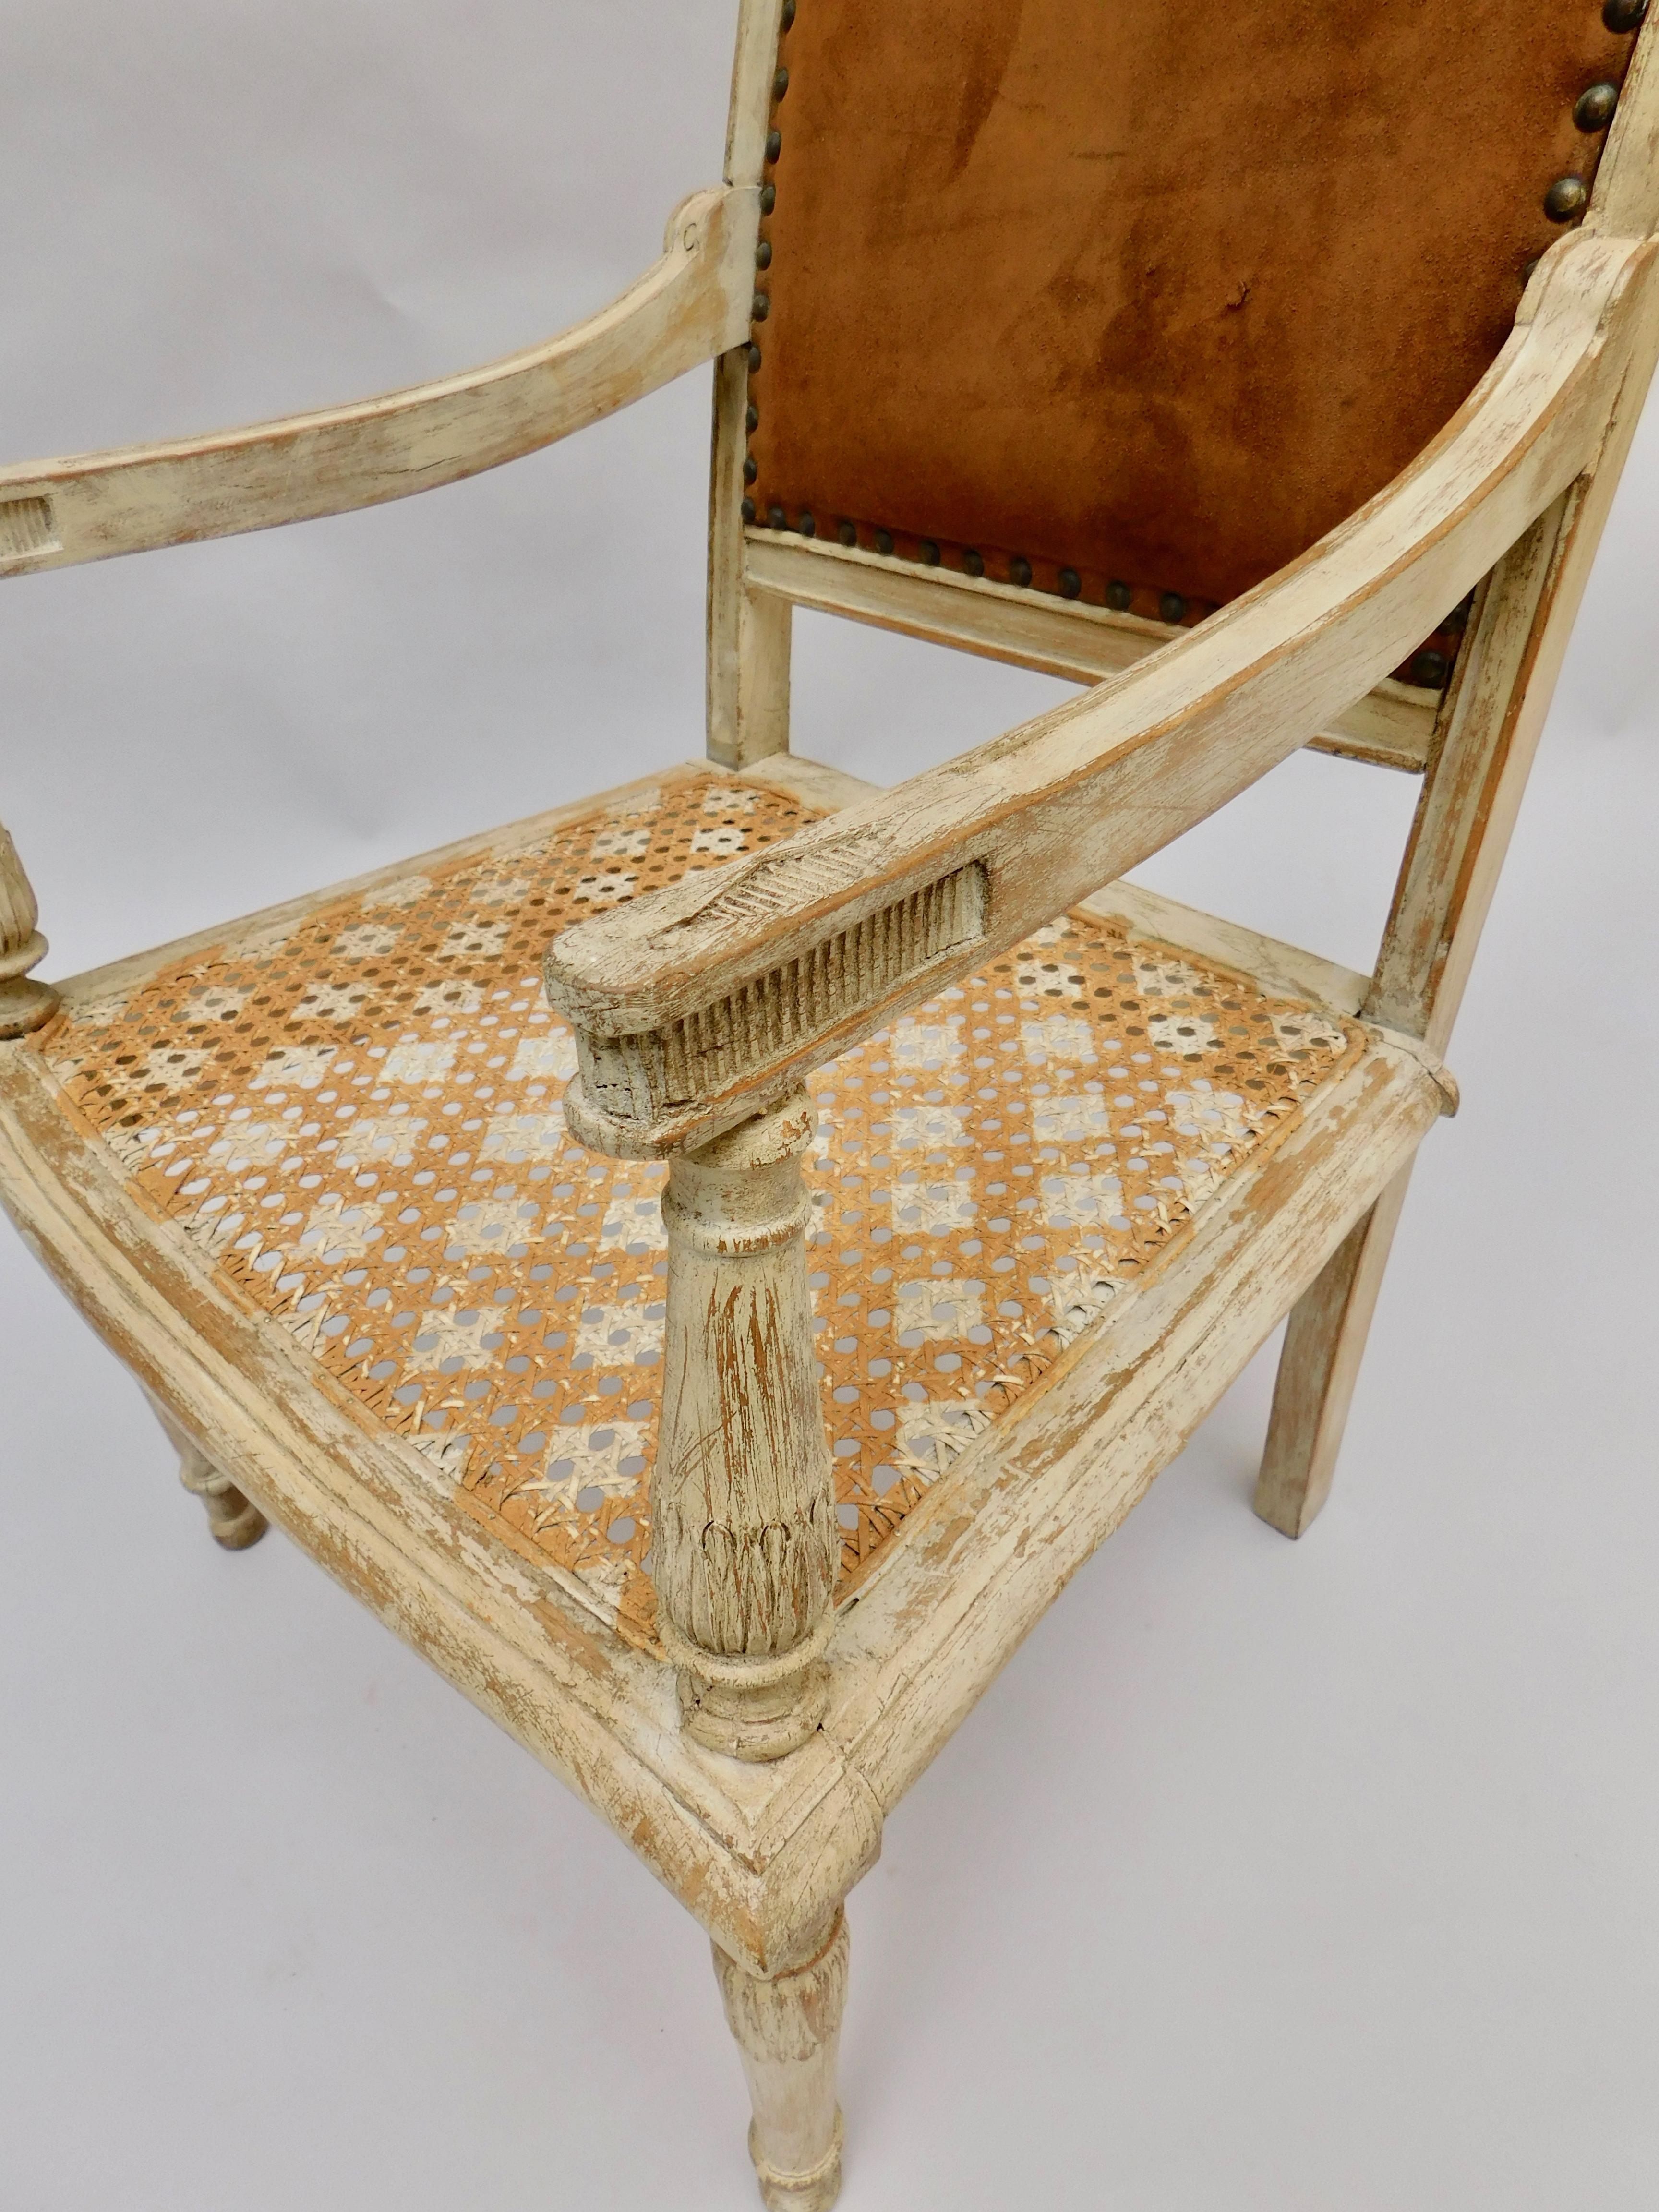 A most elegant children's armchair in the French Directoire style, circa 1890. Beautiful painted surface including the natural cane woven seat. The back retains the original caramel colored suede upholstery and brass studded nailhead trim.